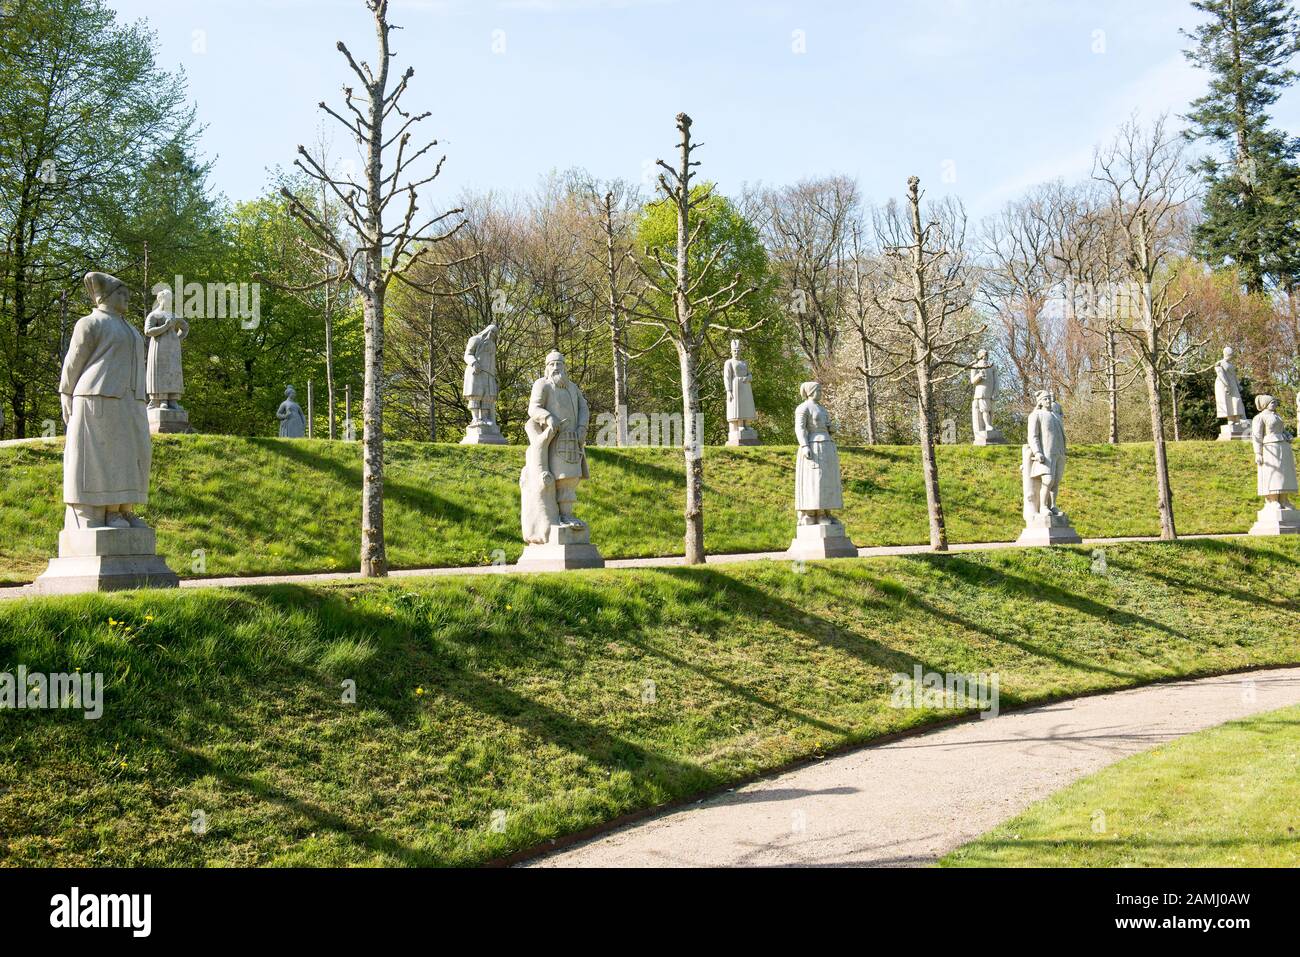 The Valley of the Norsemen at the palace gardens of Fredensborg palace in Denmark Stock Photo